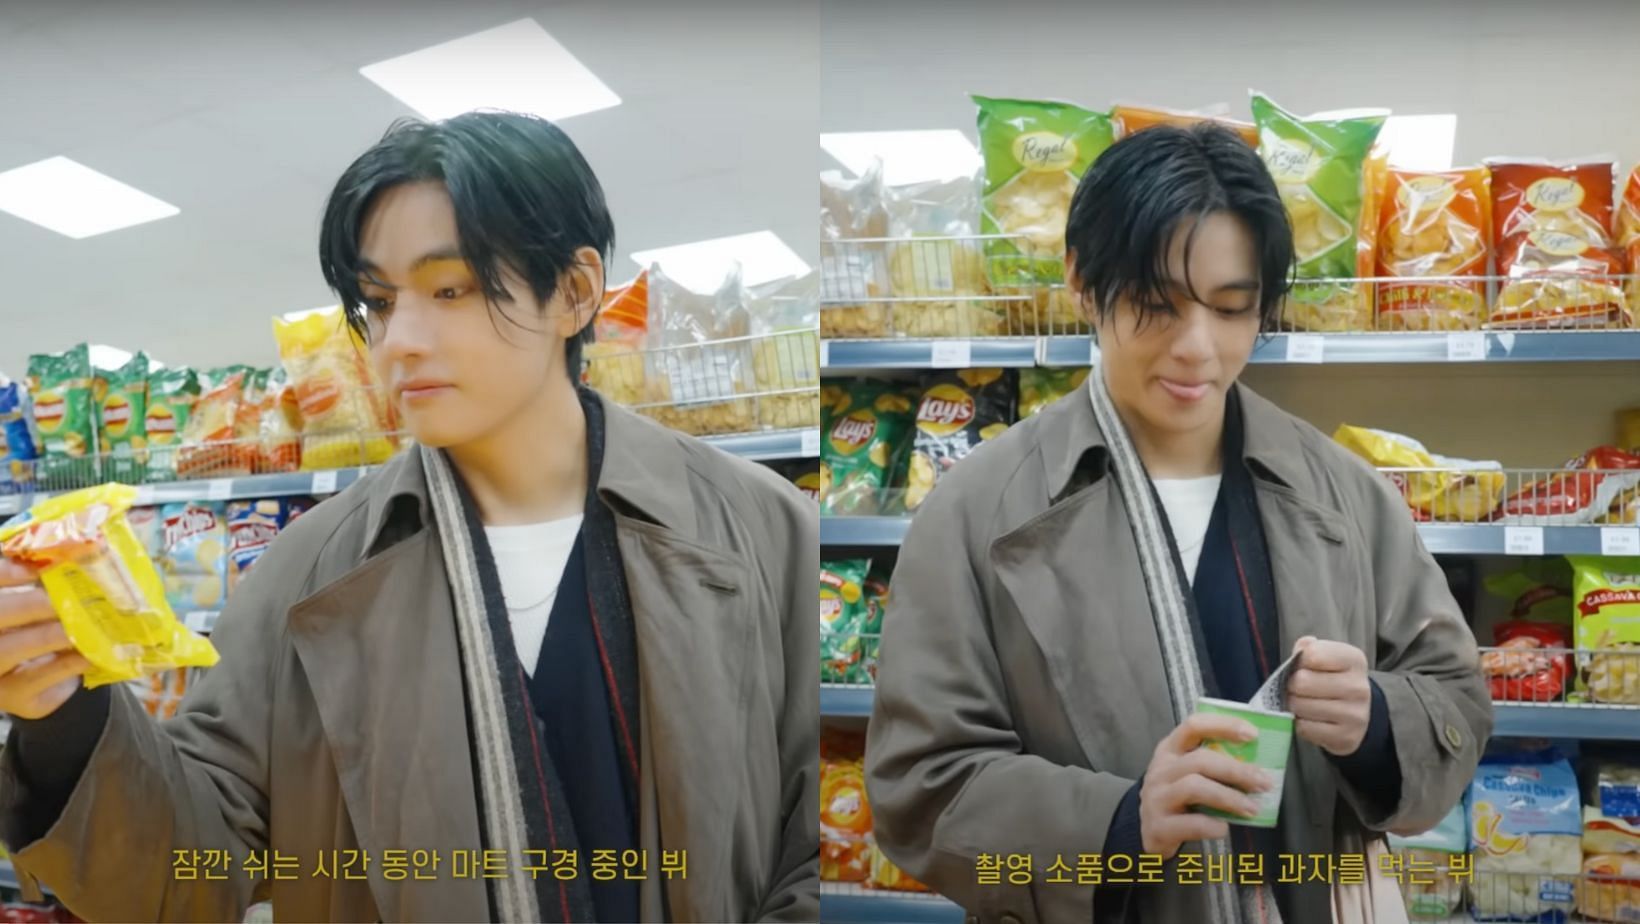 BTS&rsquo; Taehyung seen picking up Maggi and including a section full of Indian snacks in the making of &lsquo;FRI(END)S&rsquo; MV. (Images via YouTube/BANGTANTV)